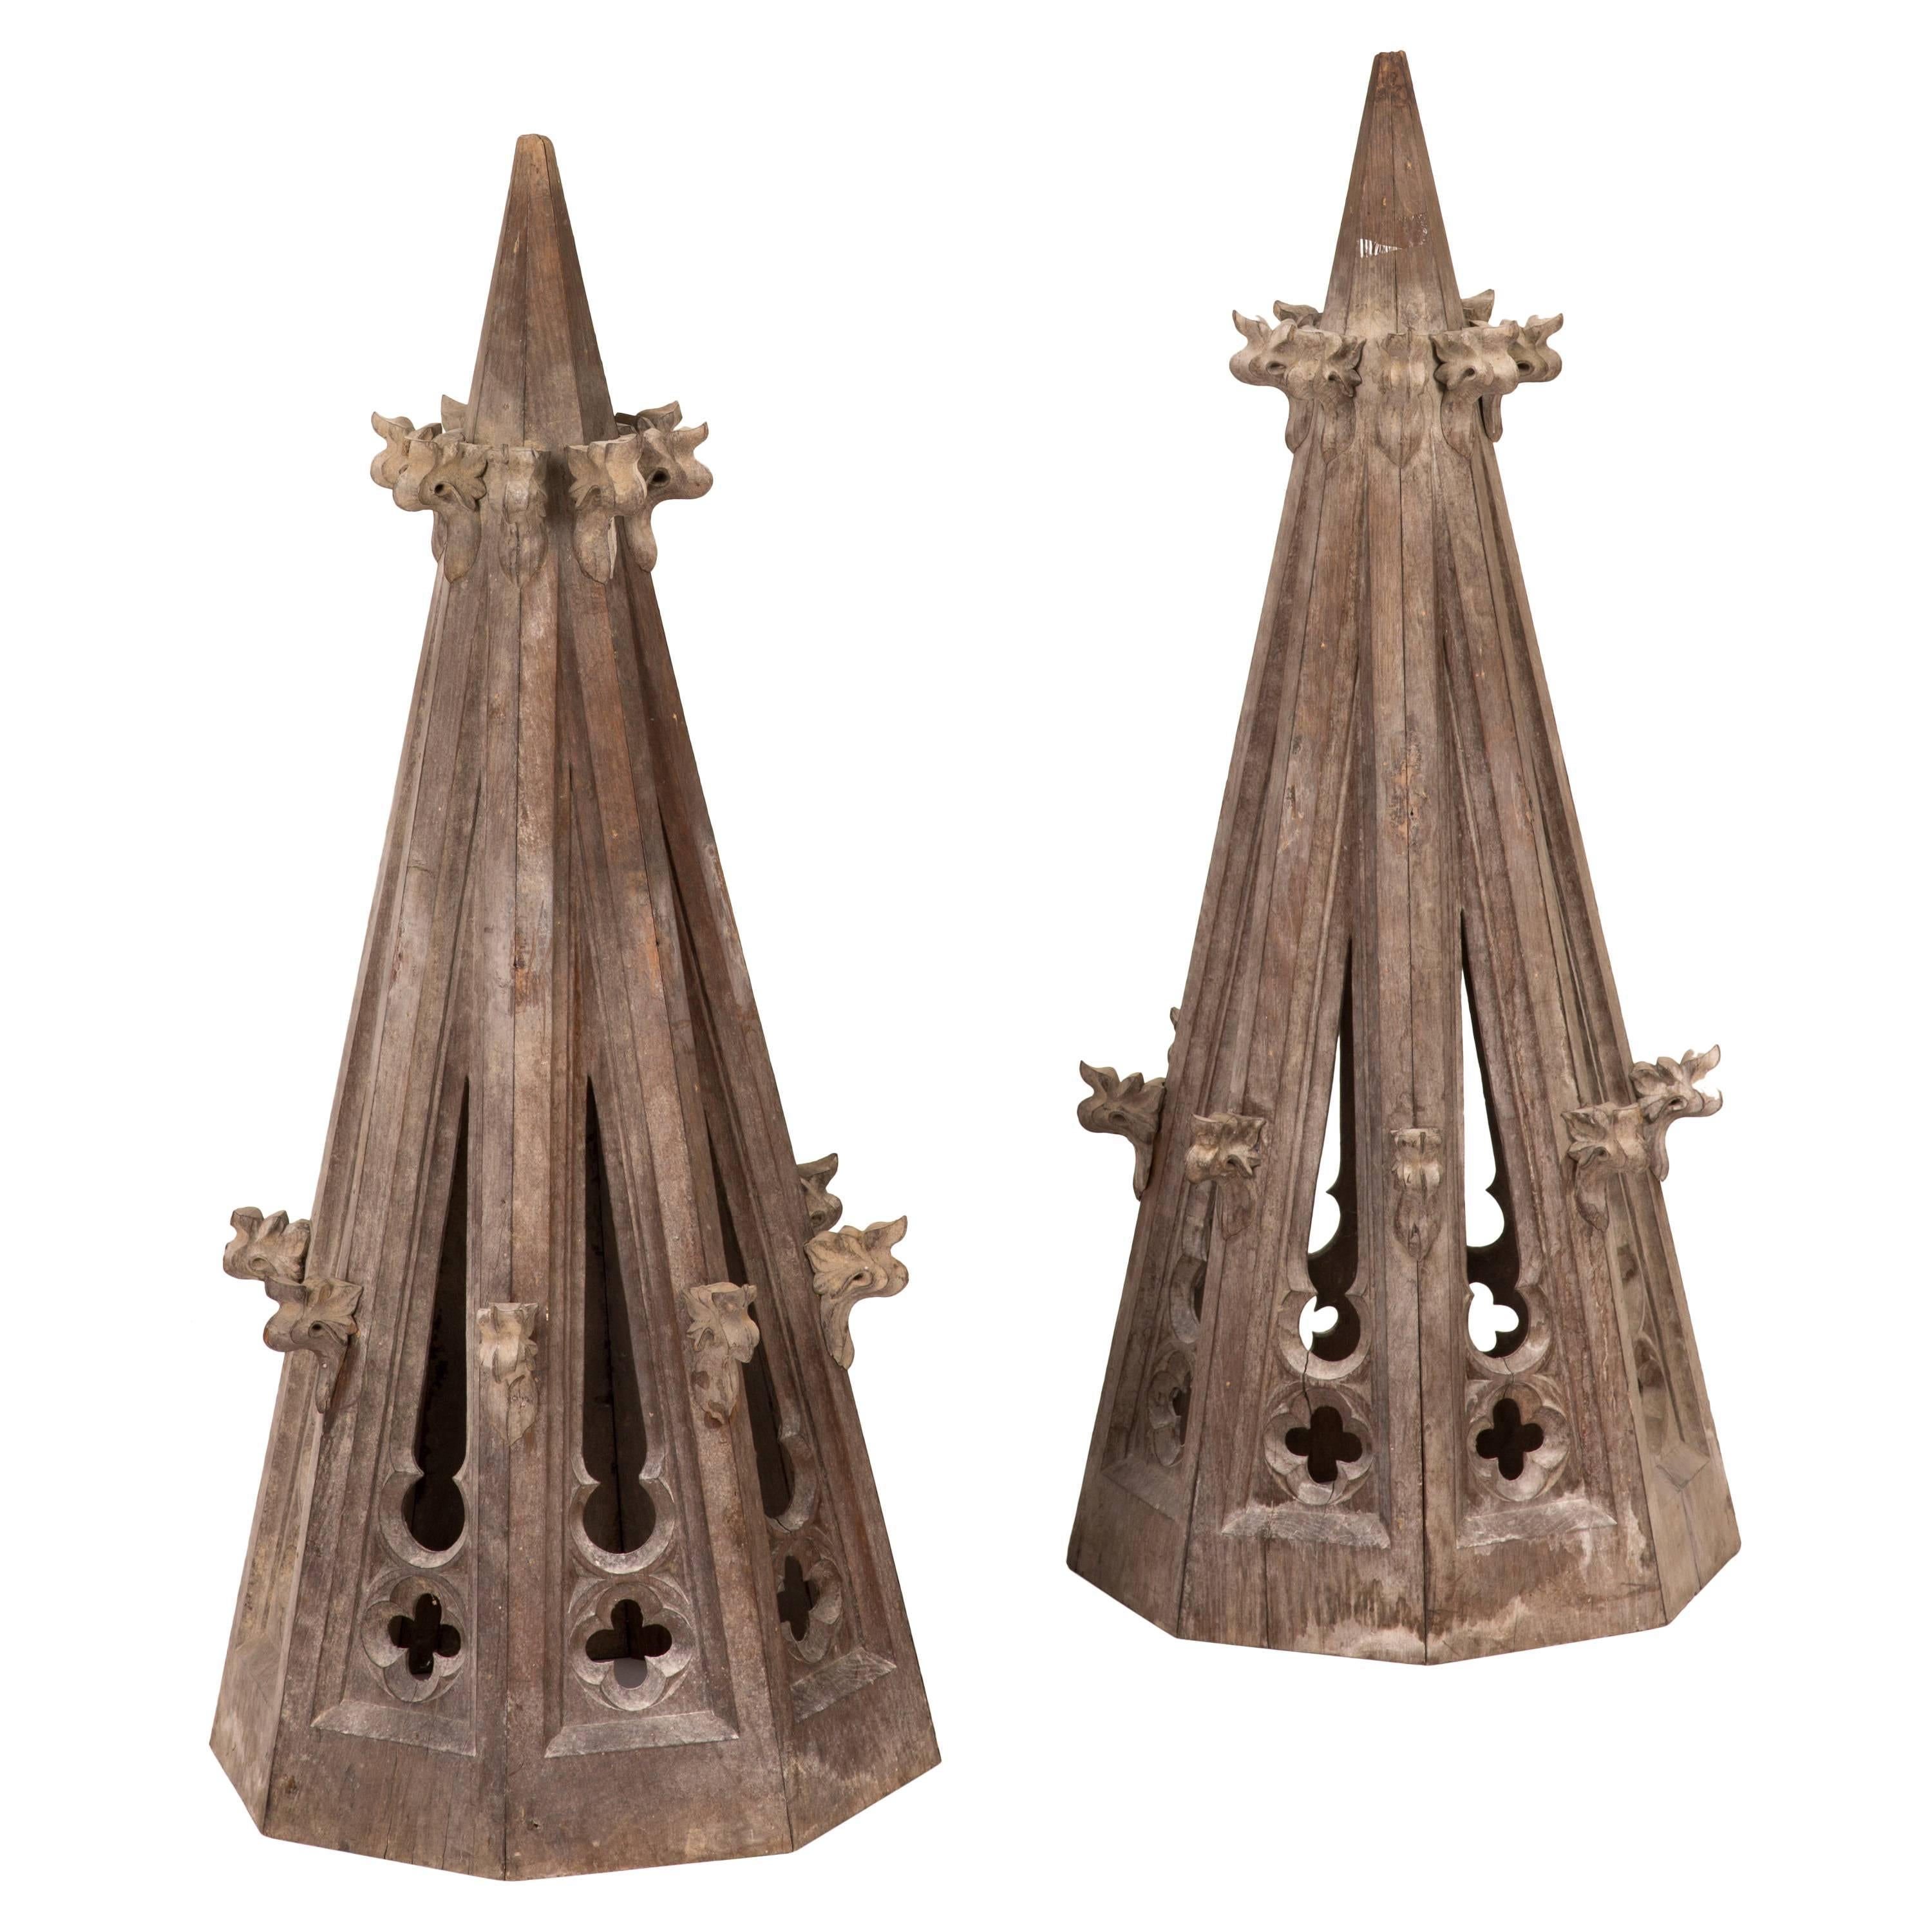 Pair of Wooden Spire Models from Late 19th Century England